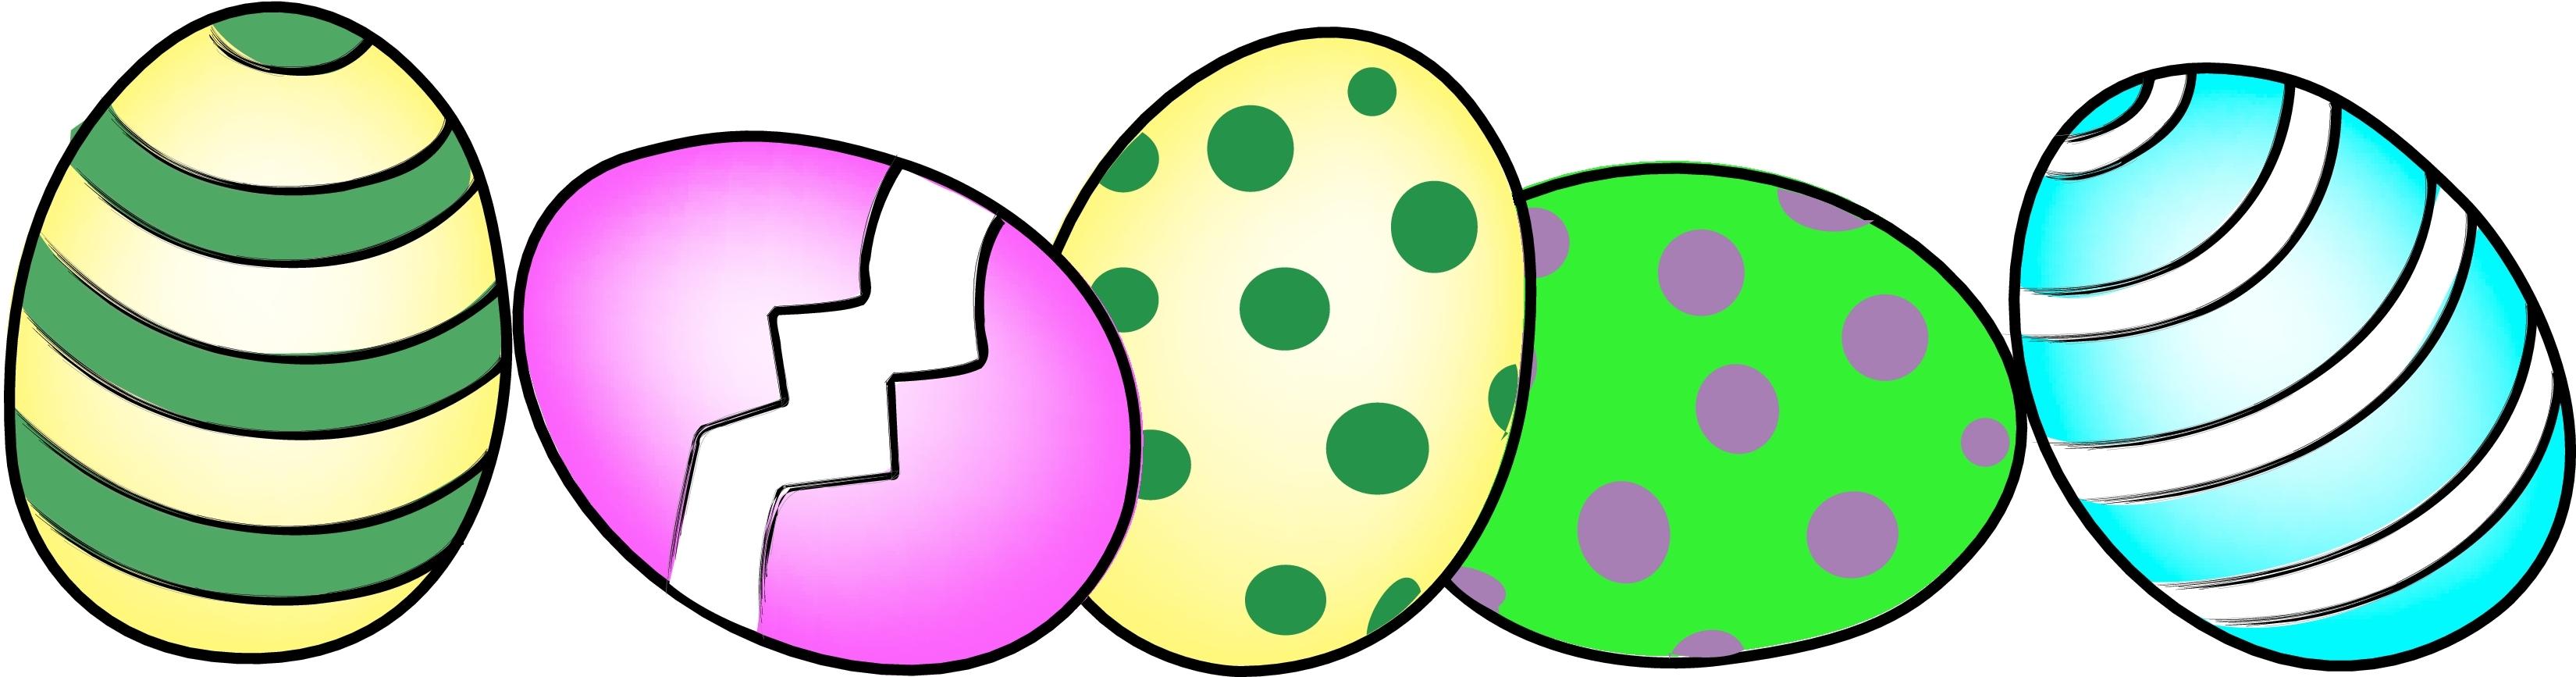 Happy images pics photos. 4 clipart easter egg